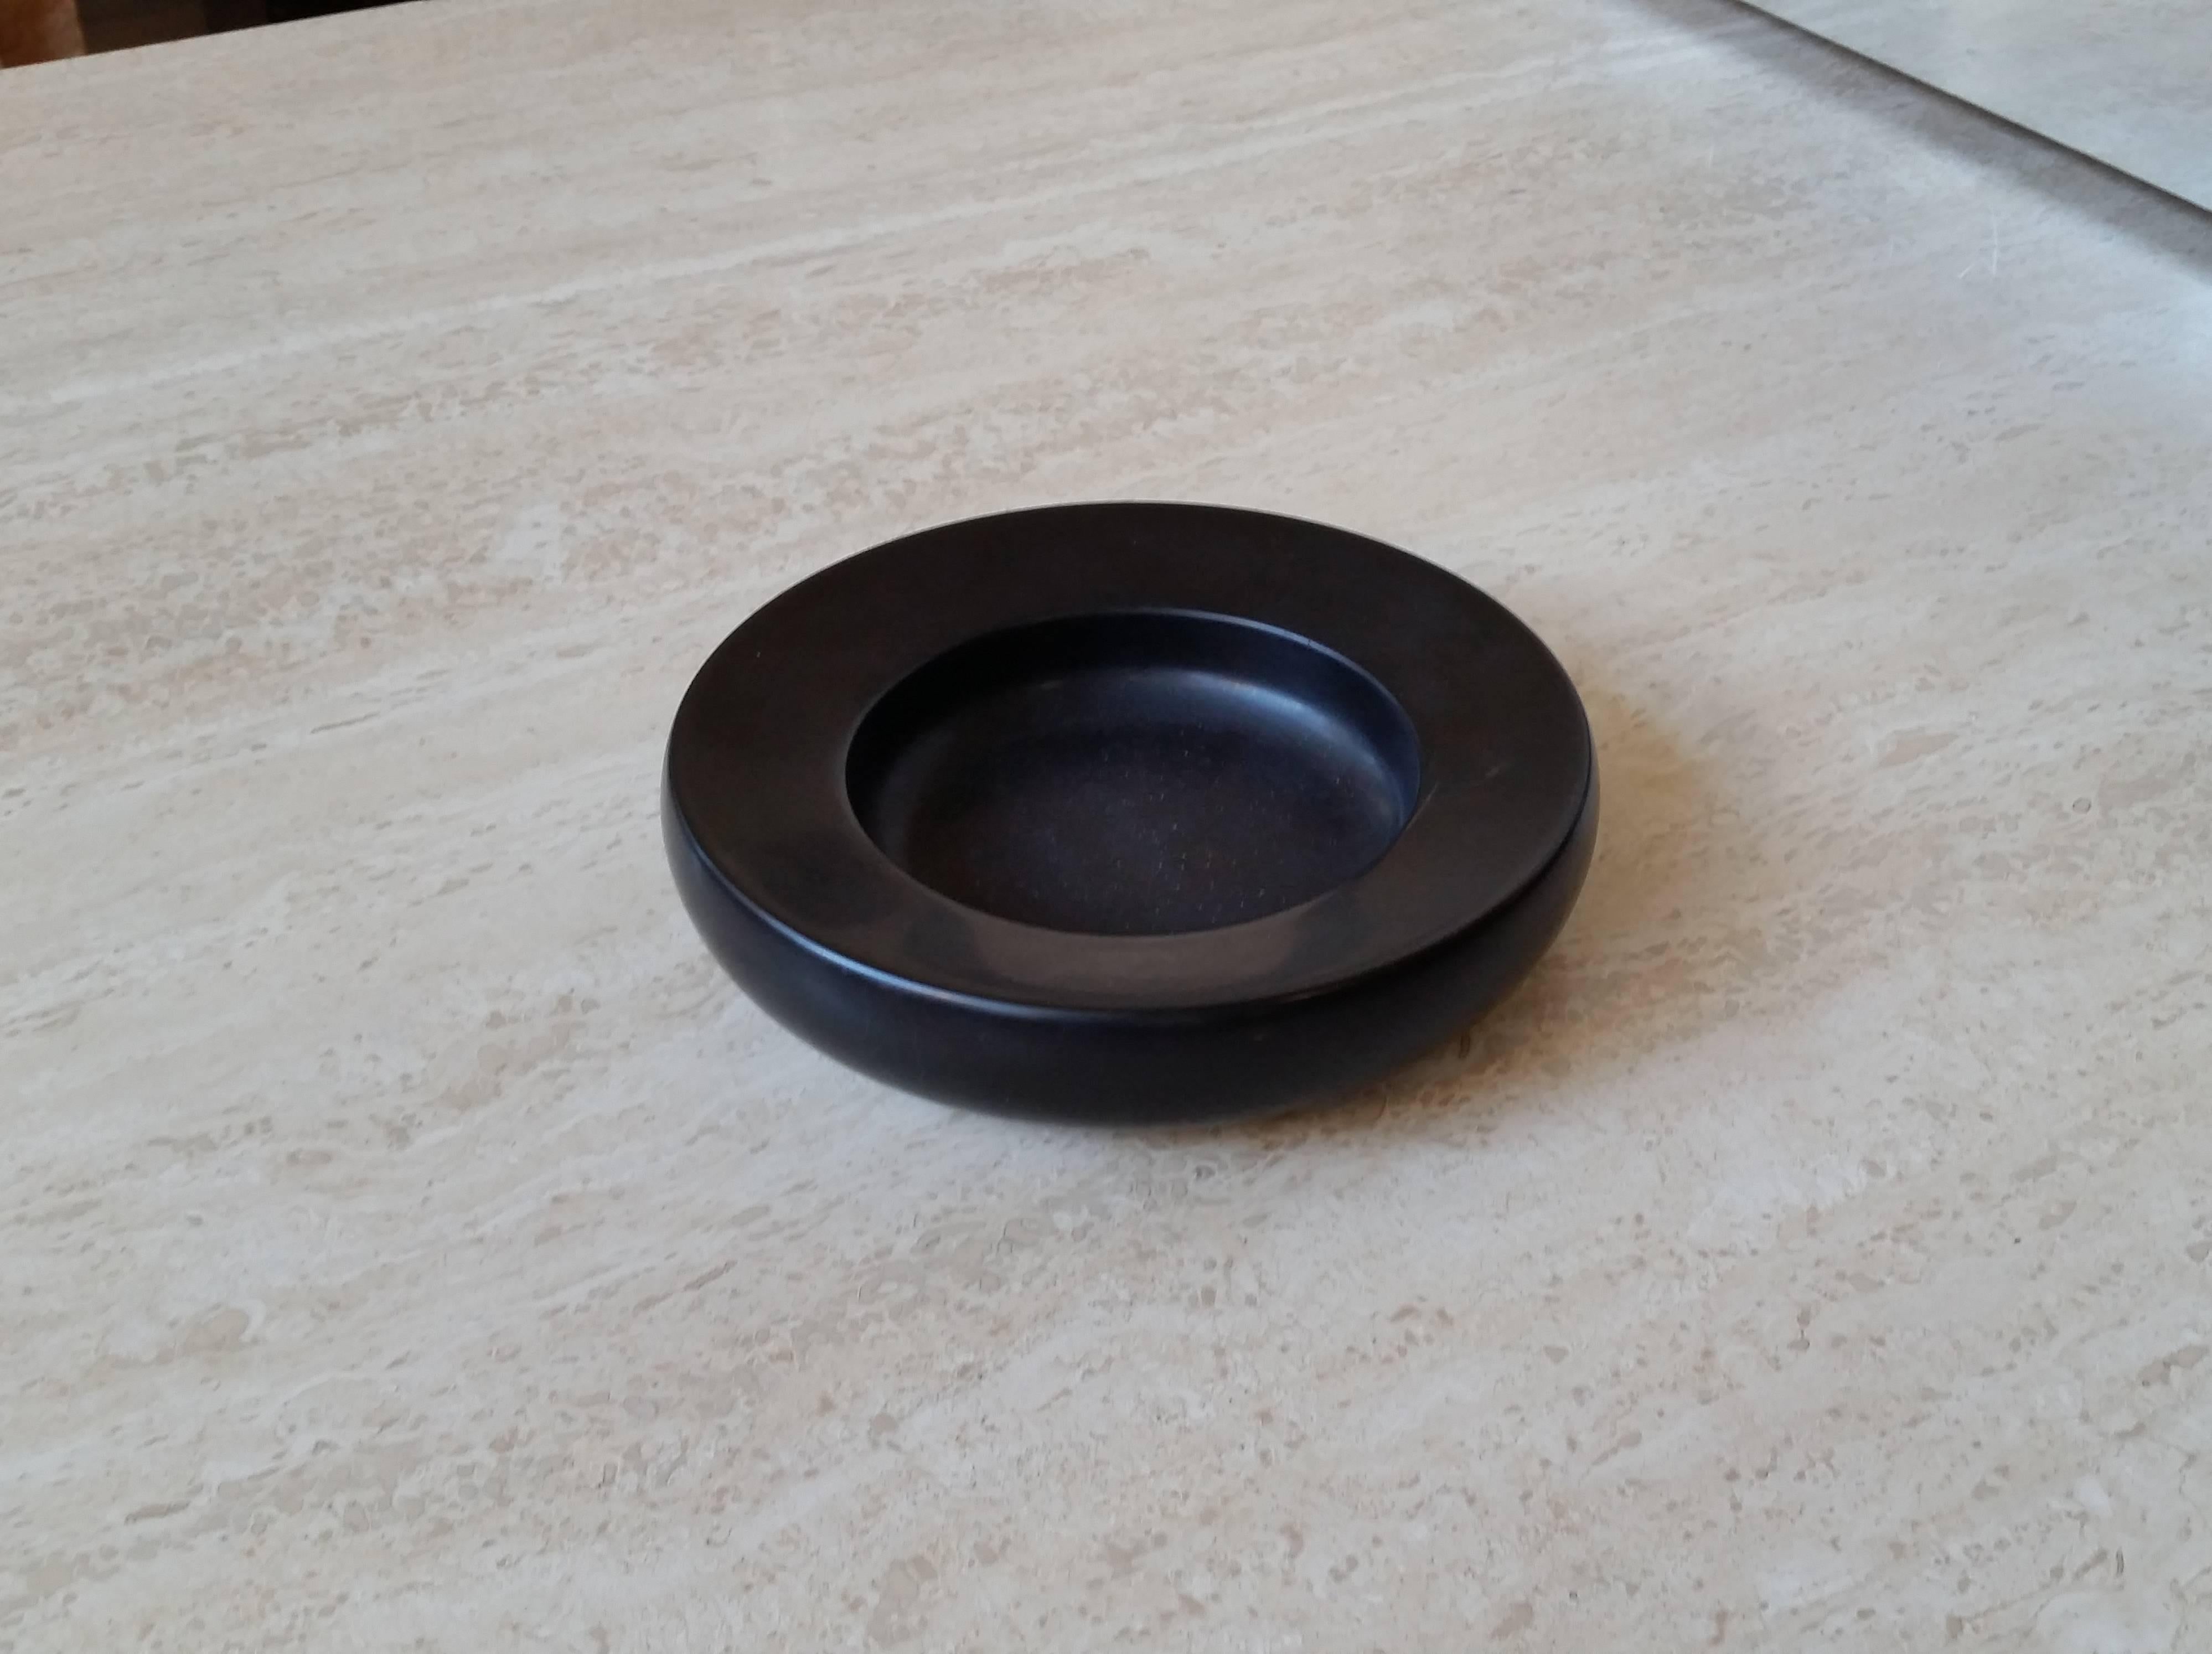 A small bowl or catch all in Belgian black marble
by Up & Up. The Garnerone decorative object was designed in 1977
by Egidio Di Rosa and Pier Alessandro Giusti.
Wonderful proportions. Great table top  or desk accessory.
Please visit our 1st Dibs